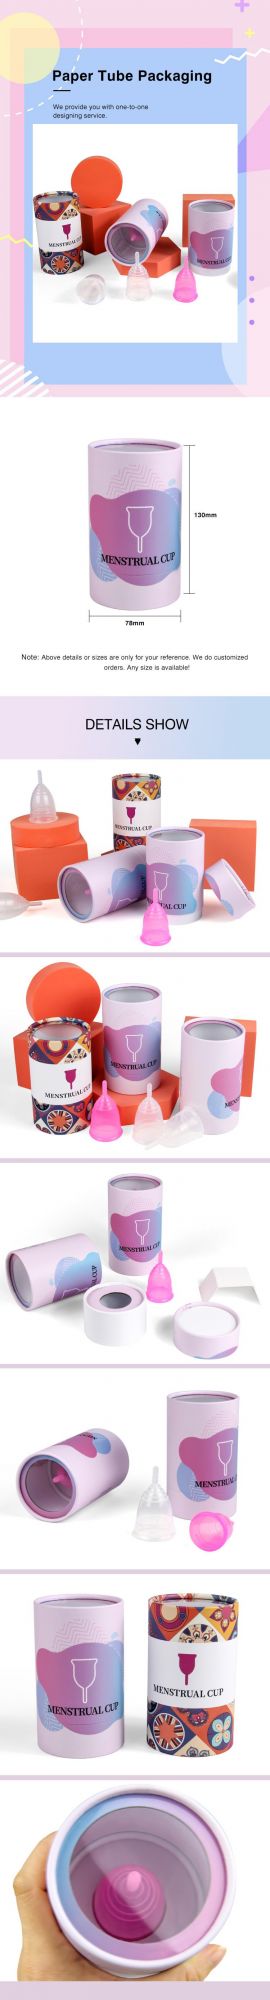 Firstsail Factory Price Luxury Printed Gift Round Cardboard Tube Packaging Cylinder Paper Box PVC Window for Period Silicone Menstrual Cup Personal Care Product